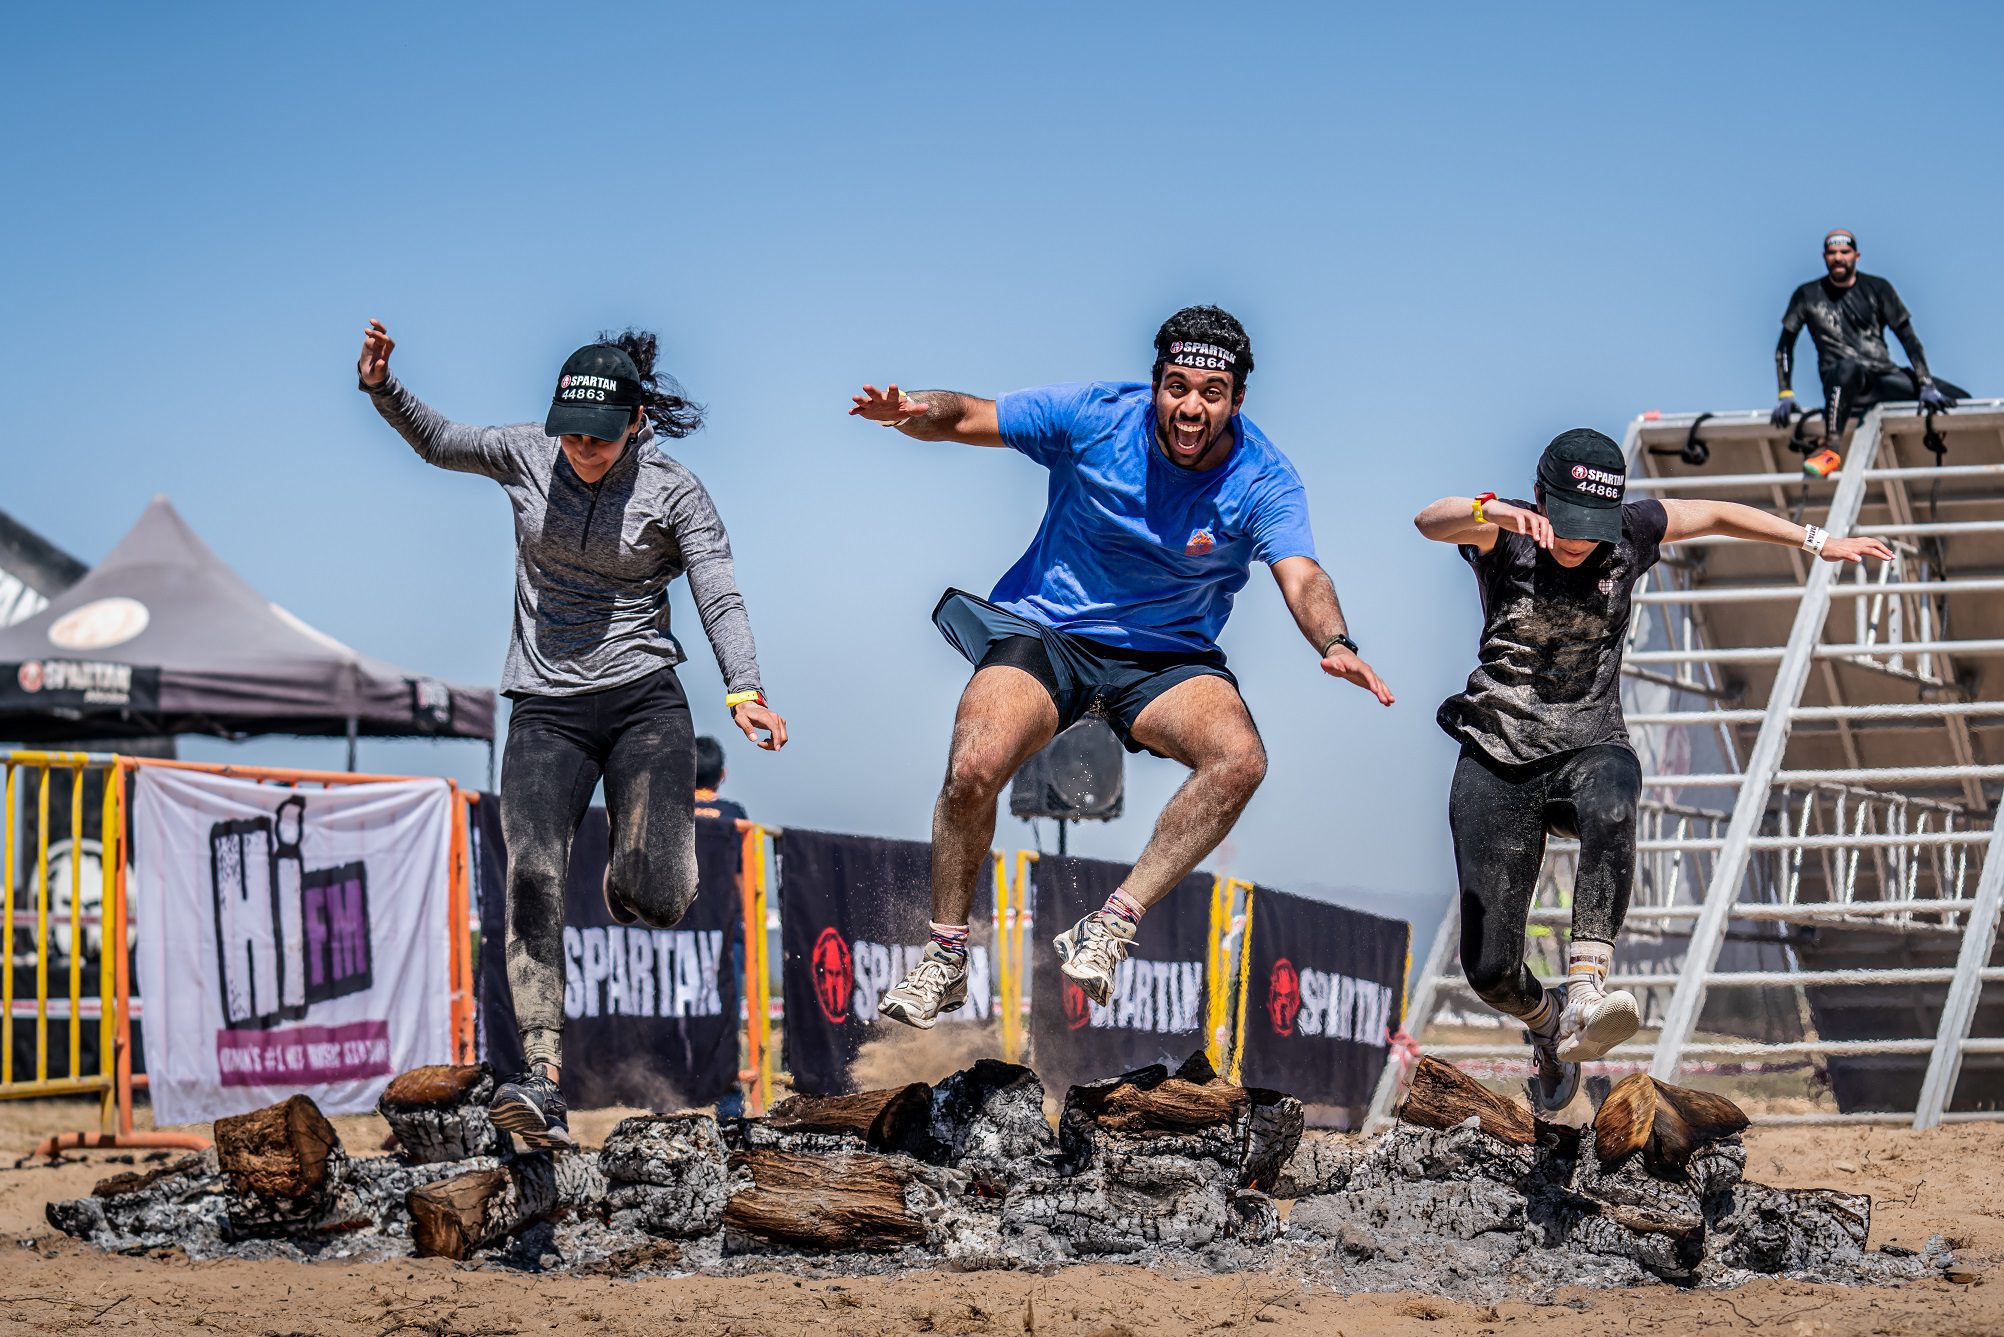 Get a taste for Spartan life with an exciting obstacle ahead of World Championship in Abu Dhabi